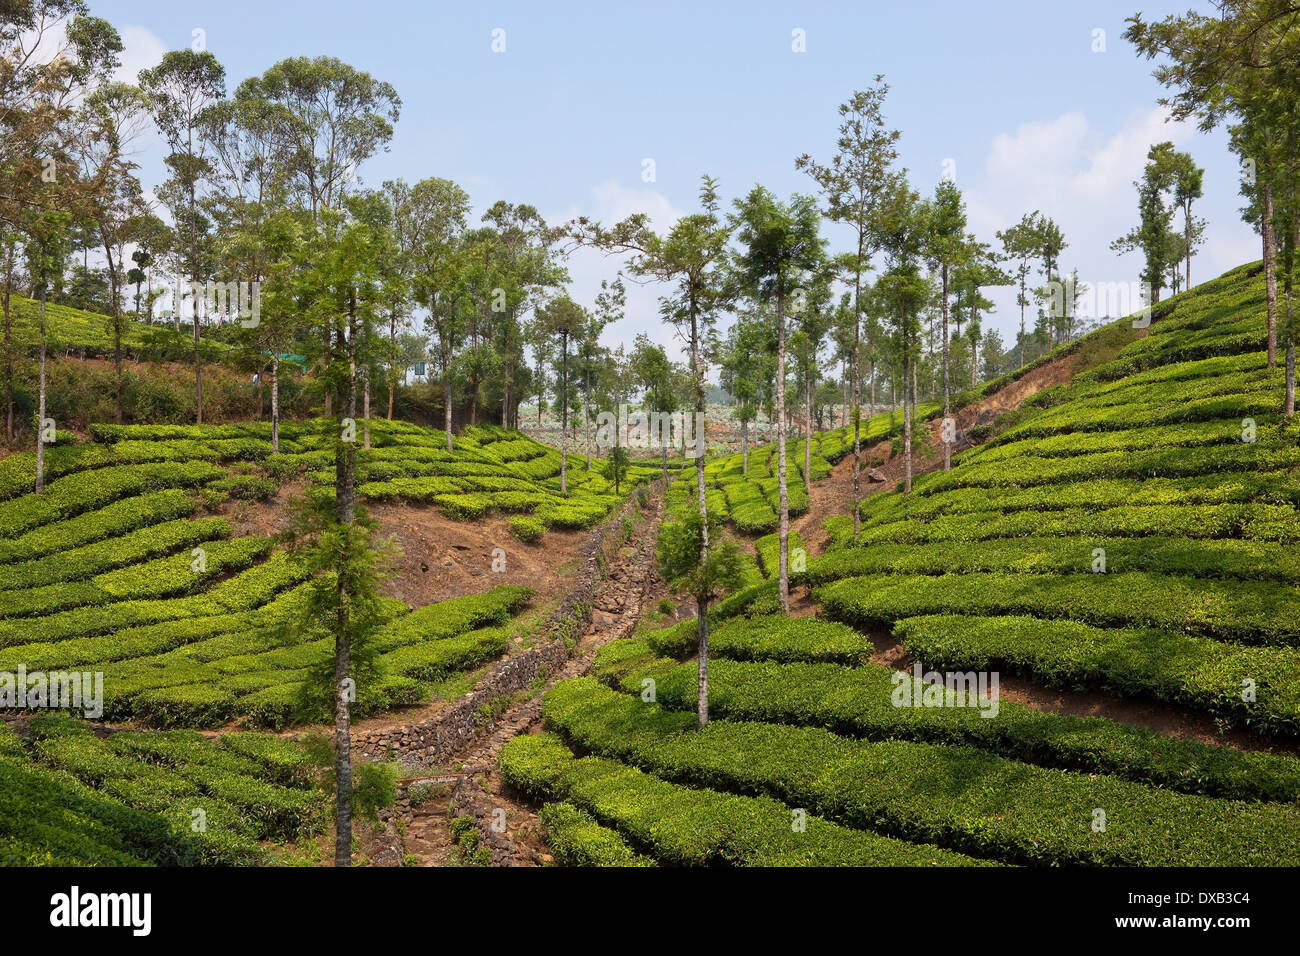 Patterns and textures of green tea bushes and shade trees in the hill country of Kerala, South India Stock Photo